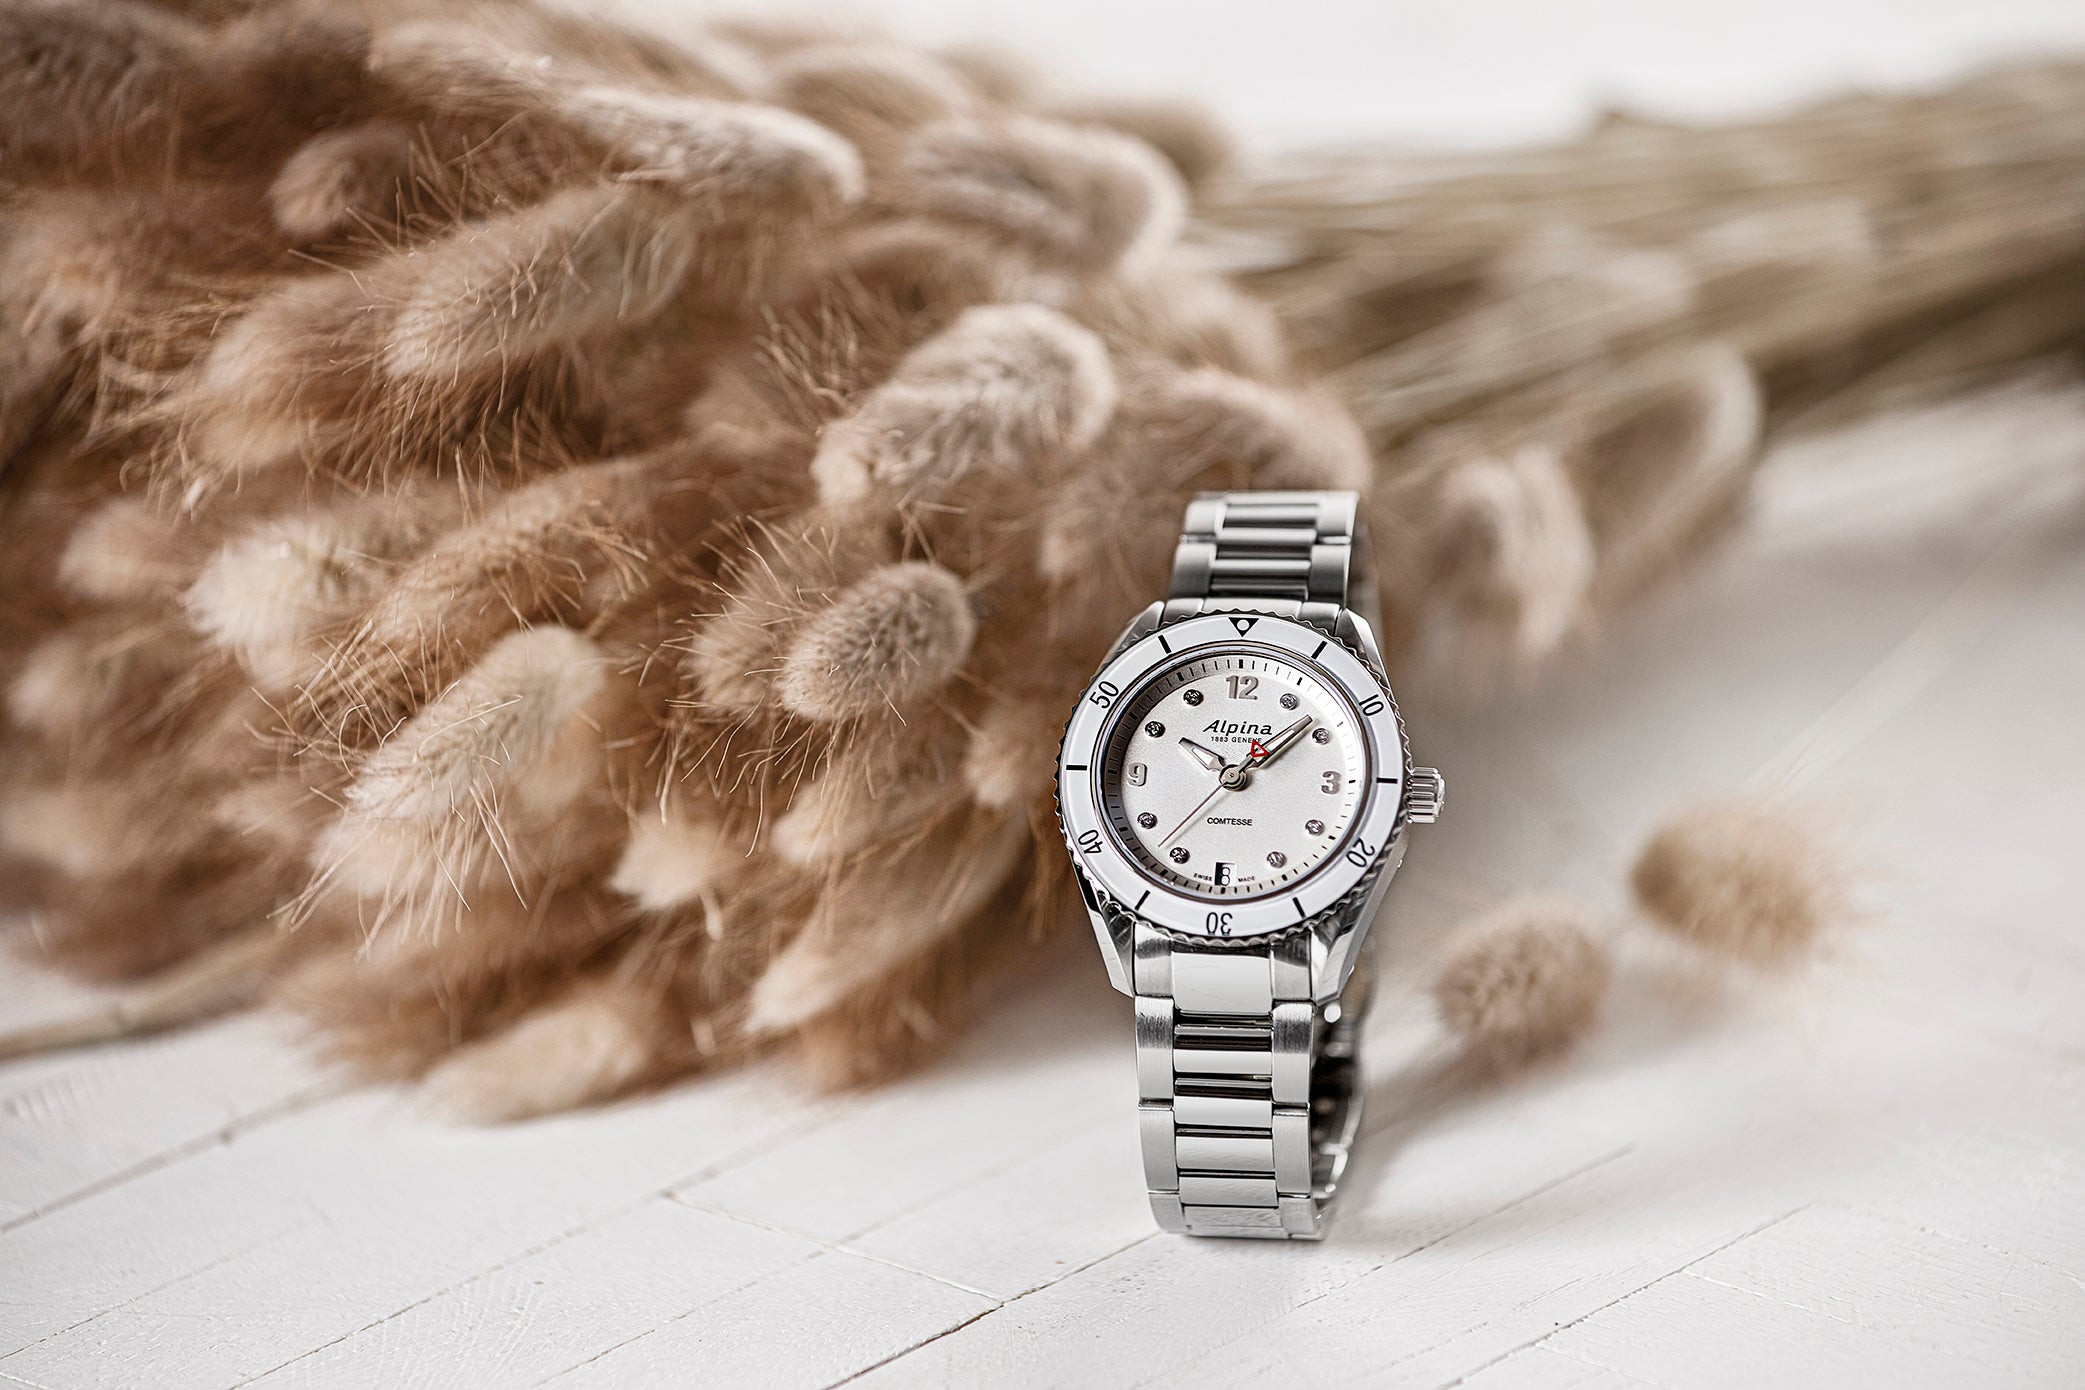 THE NEW ALPINER COMTESSE SPORT QUARTZ: BACK TO THE ROOTS OF FEMININE SPORTS CHIC